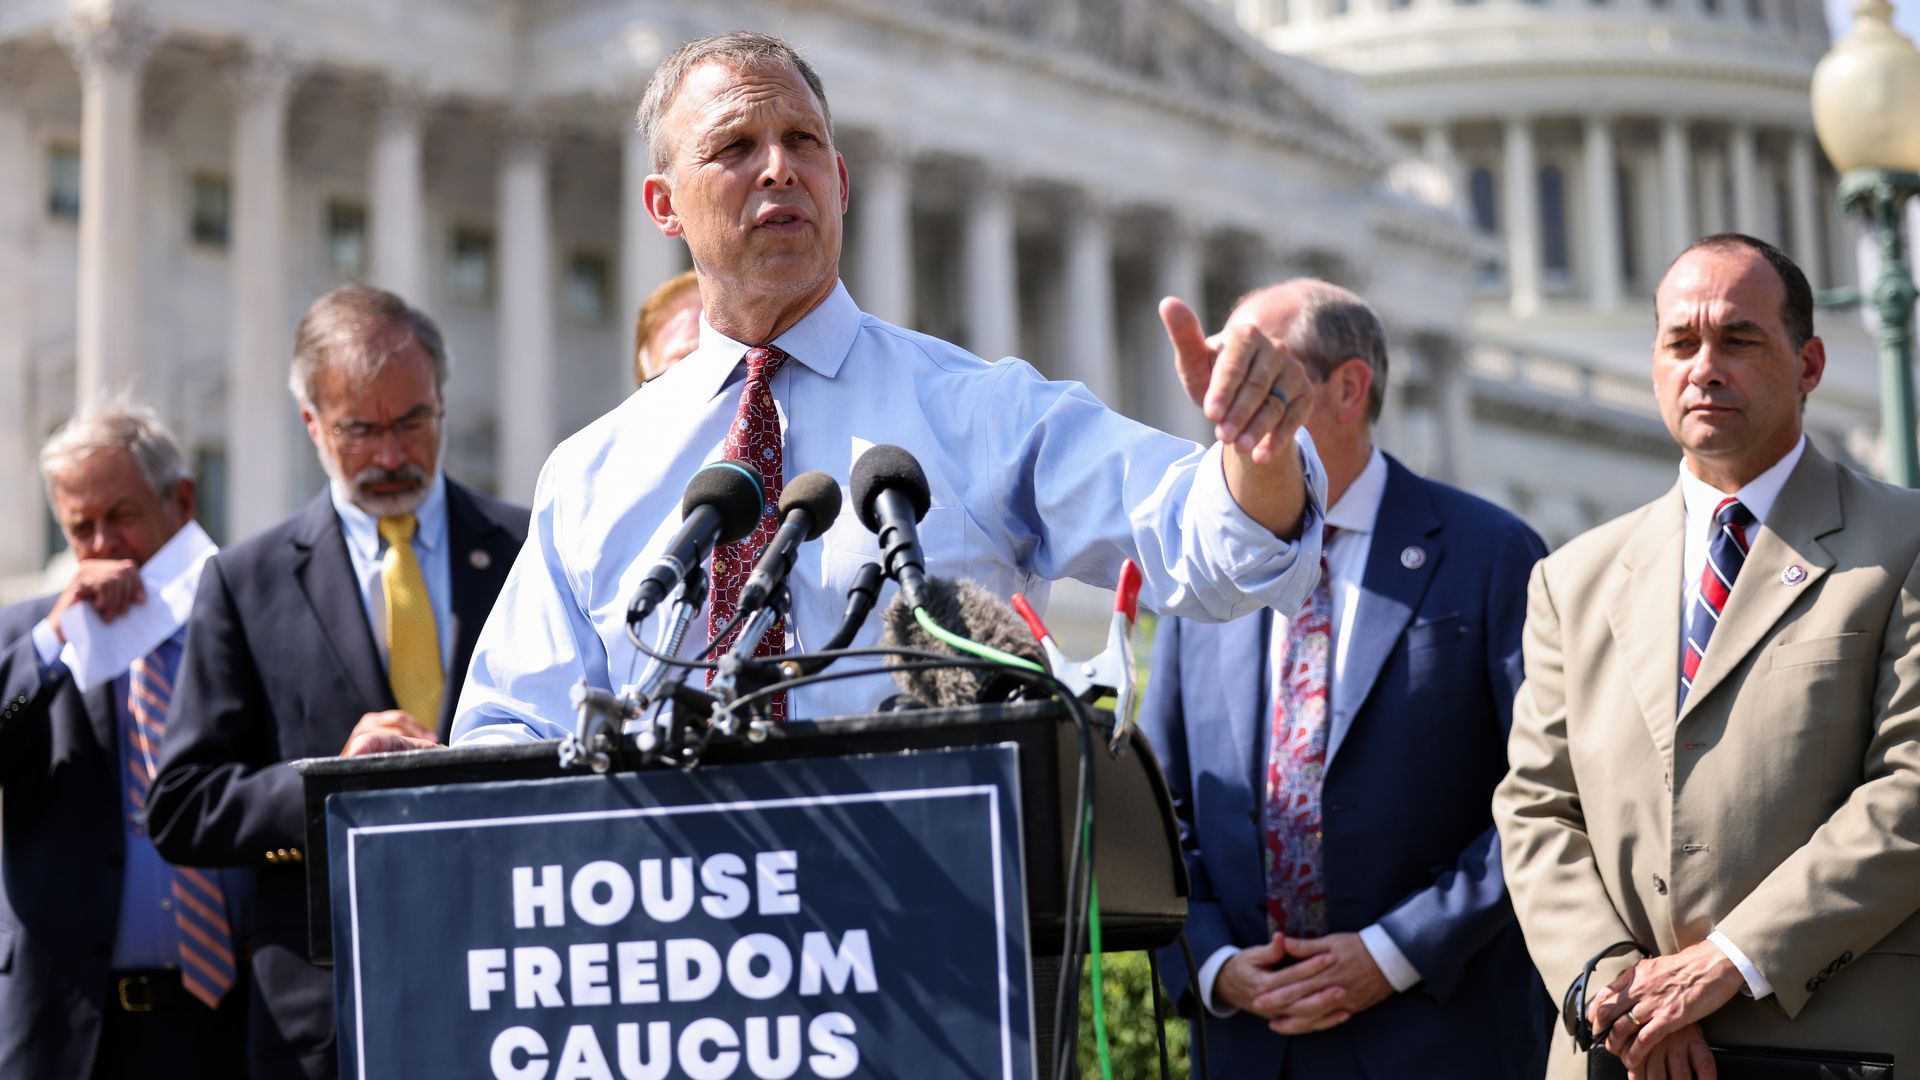 Man gestures while speaking at a podium that reads House Freedom Caucus in front of the U.S. Capitol building. 